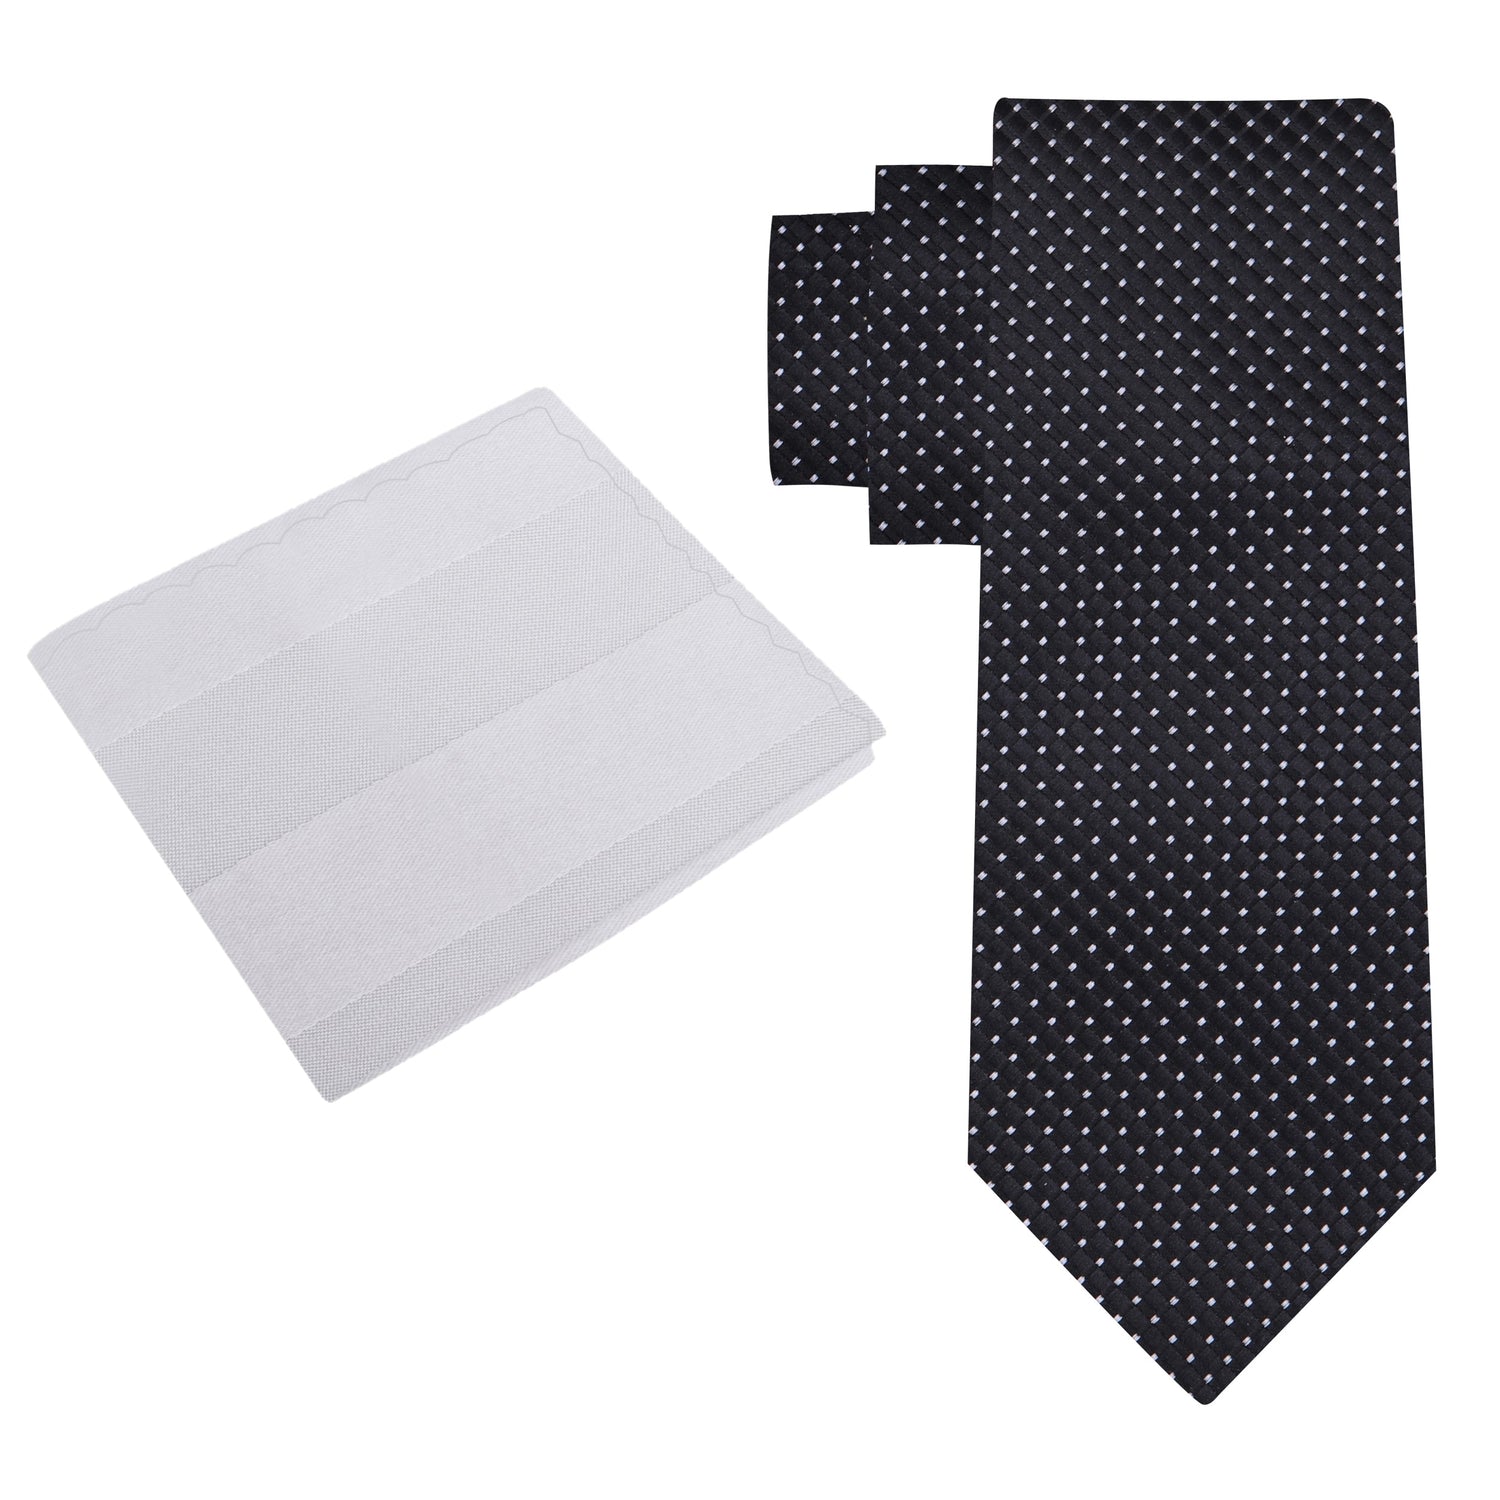 Alt View: A Black Small Geometric Diamond With Small Dots Pattern Silk Necktie With Silver Block Stripe Pocket Square|